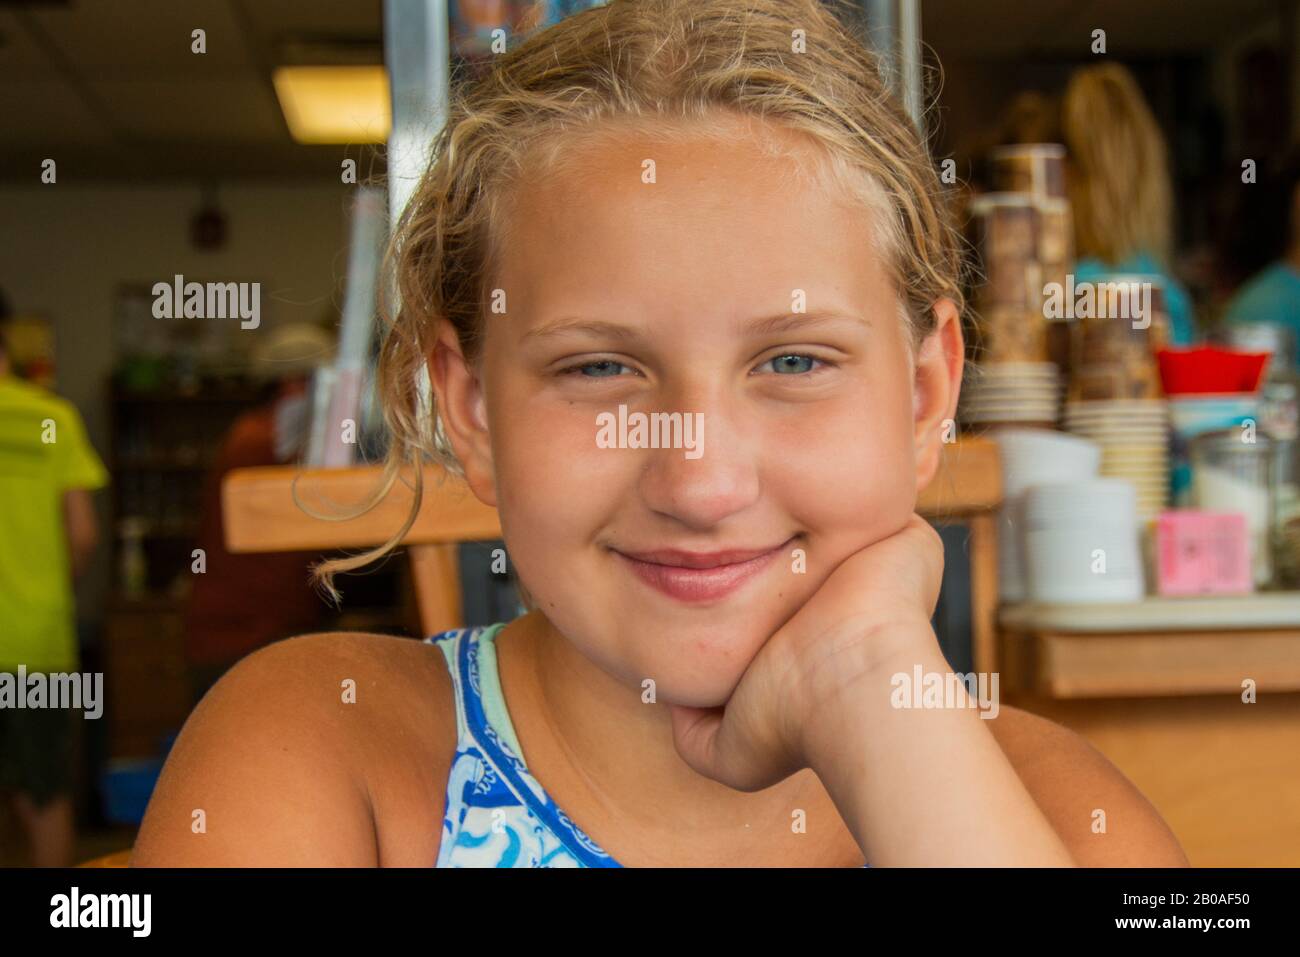 Young firl in diner smirking Stock Photo